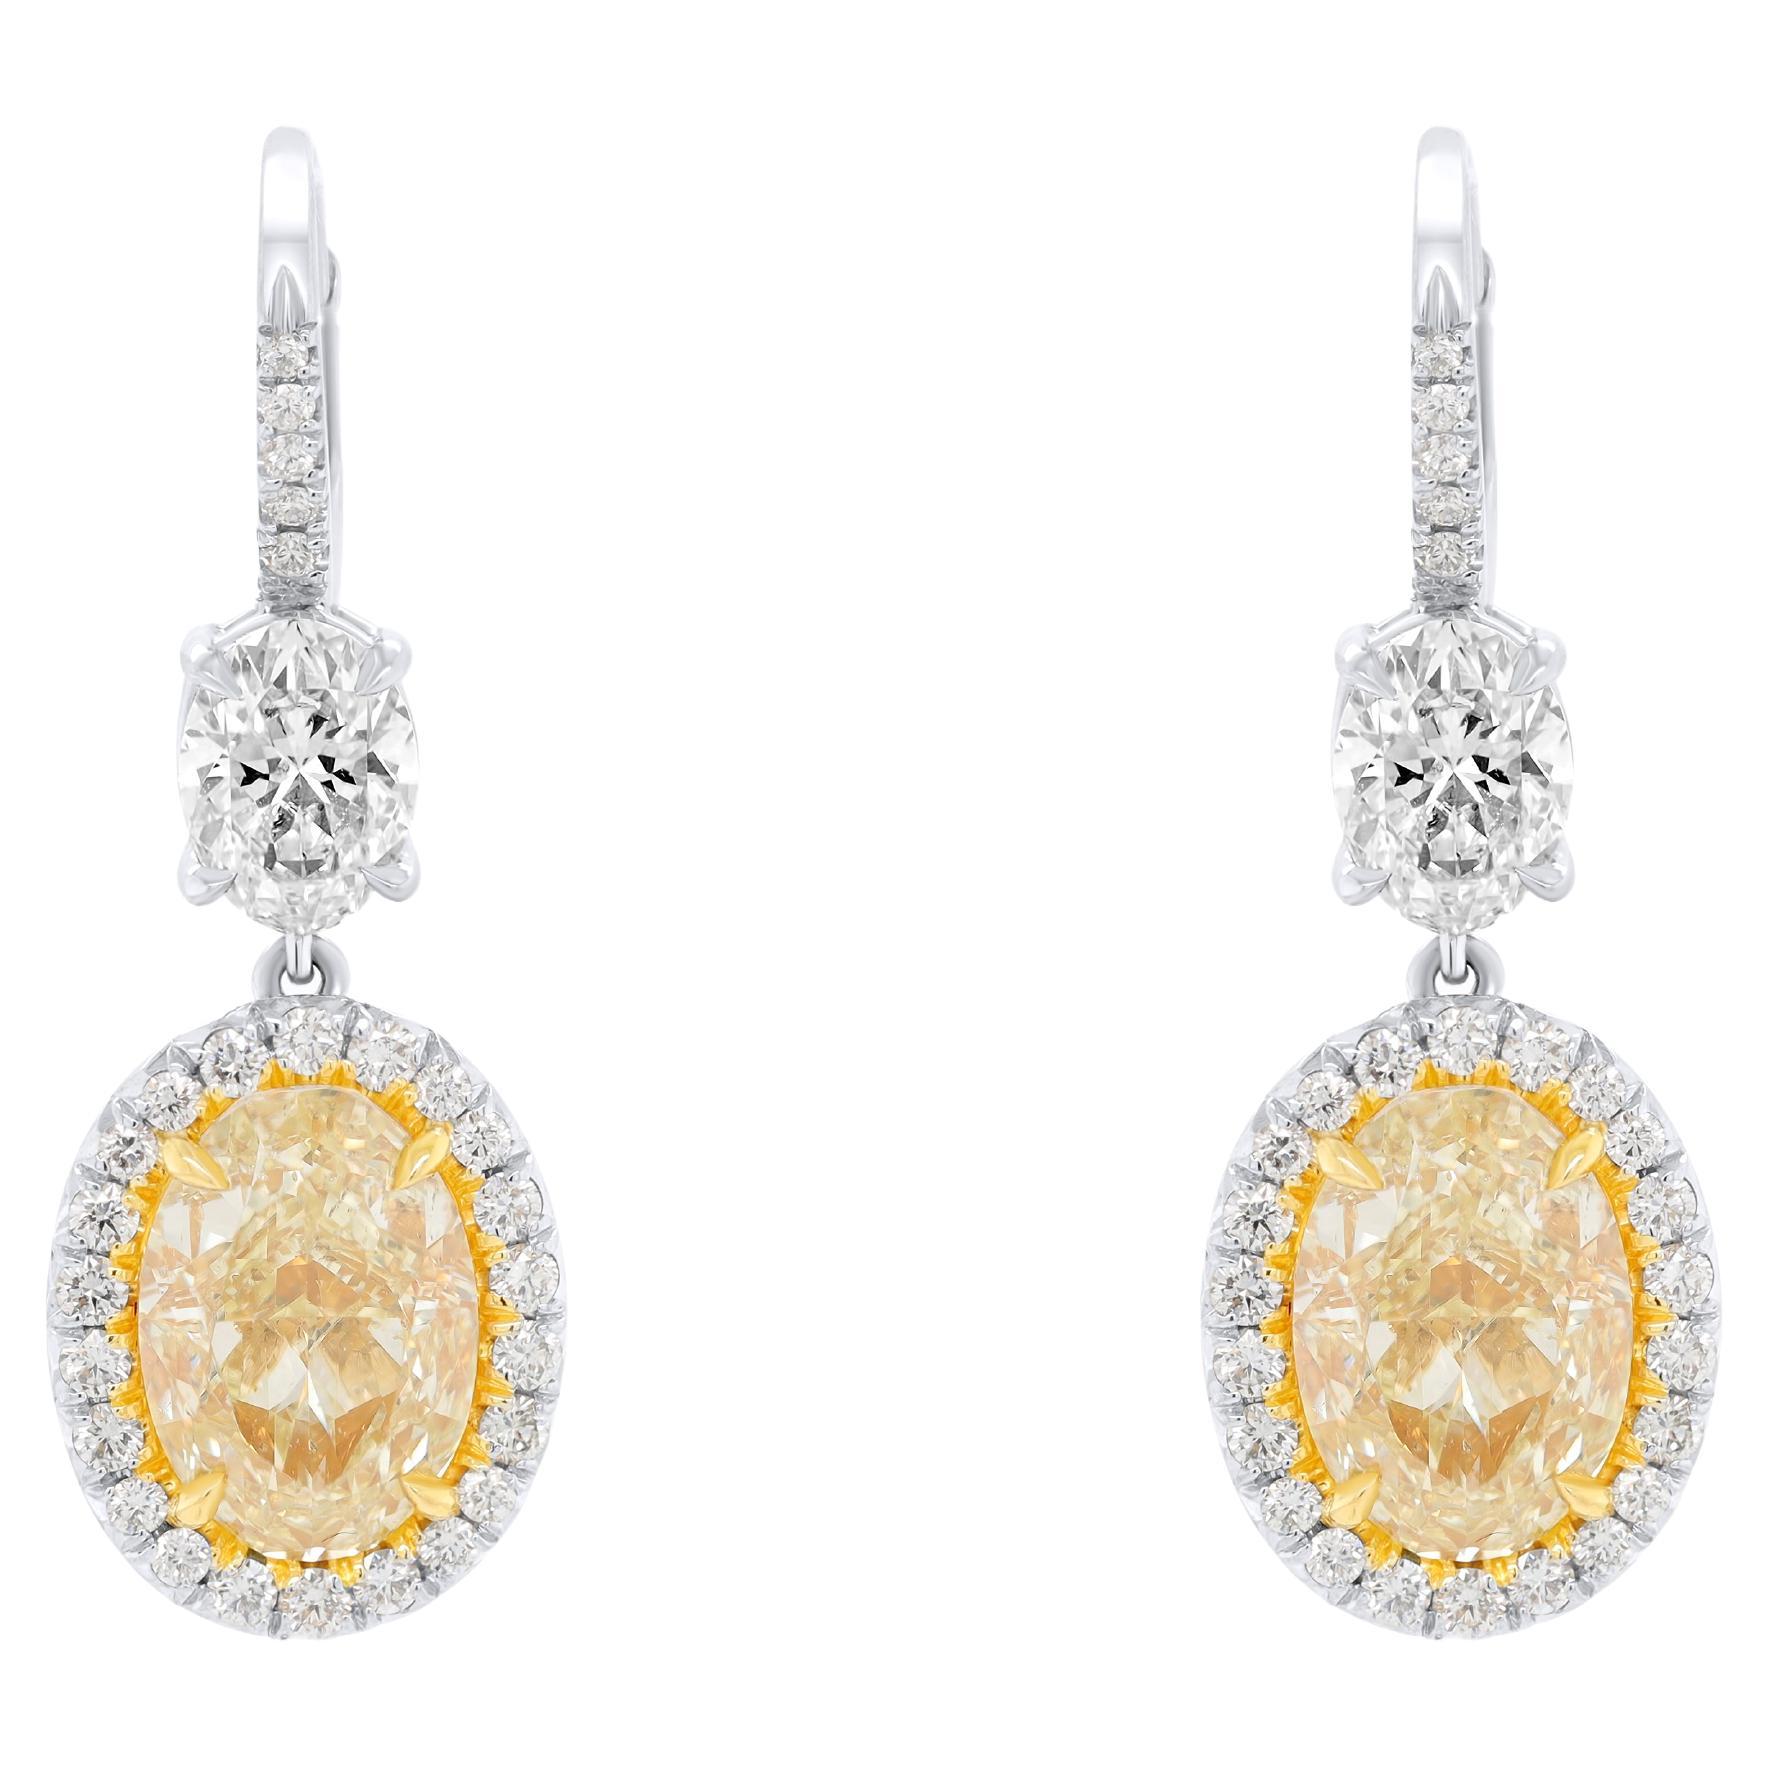 Fancy Yellow Oval Shaped Diamond Handing Earrings features total diamonds weight, each diamond is GIA Certified. 
These beautiful diamond earrings set in Platinum and 18K Yellow Gold, each diamond is 3.03 Carats Fancy Light Yellow SI2 in Clarity FUA